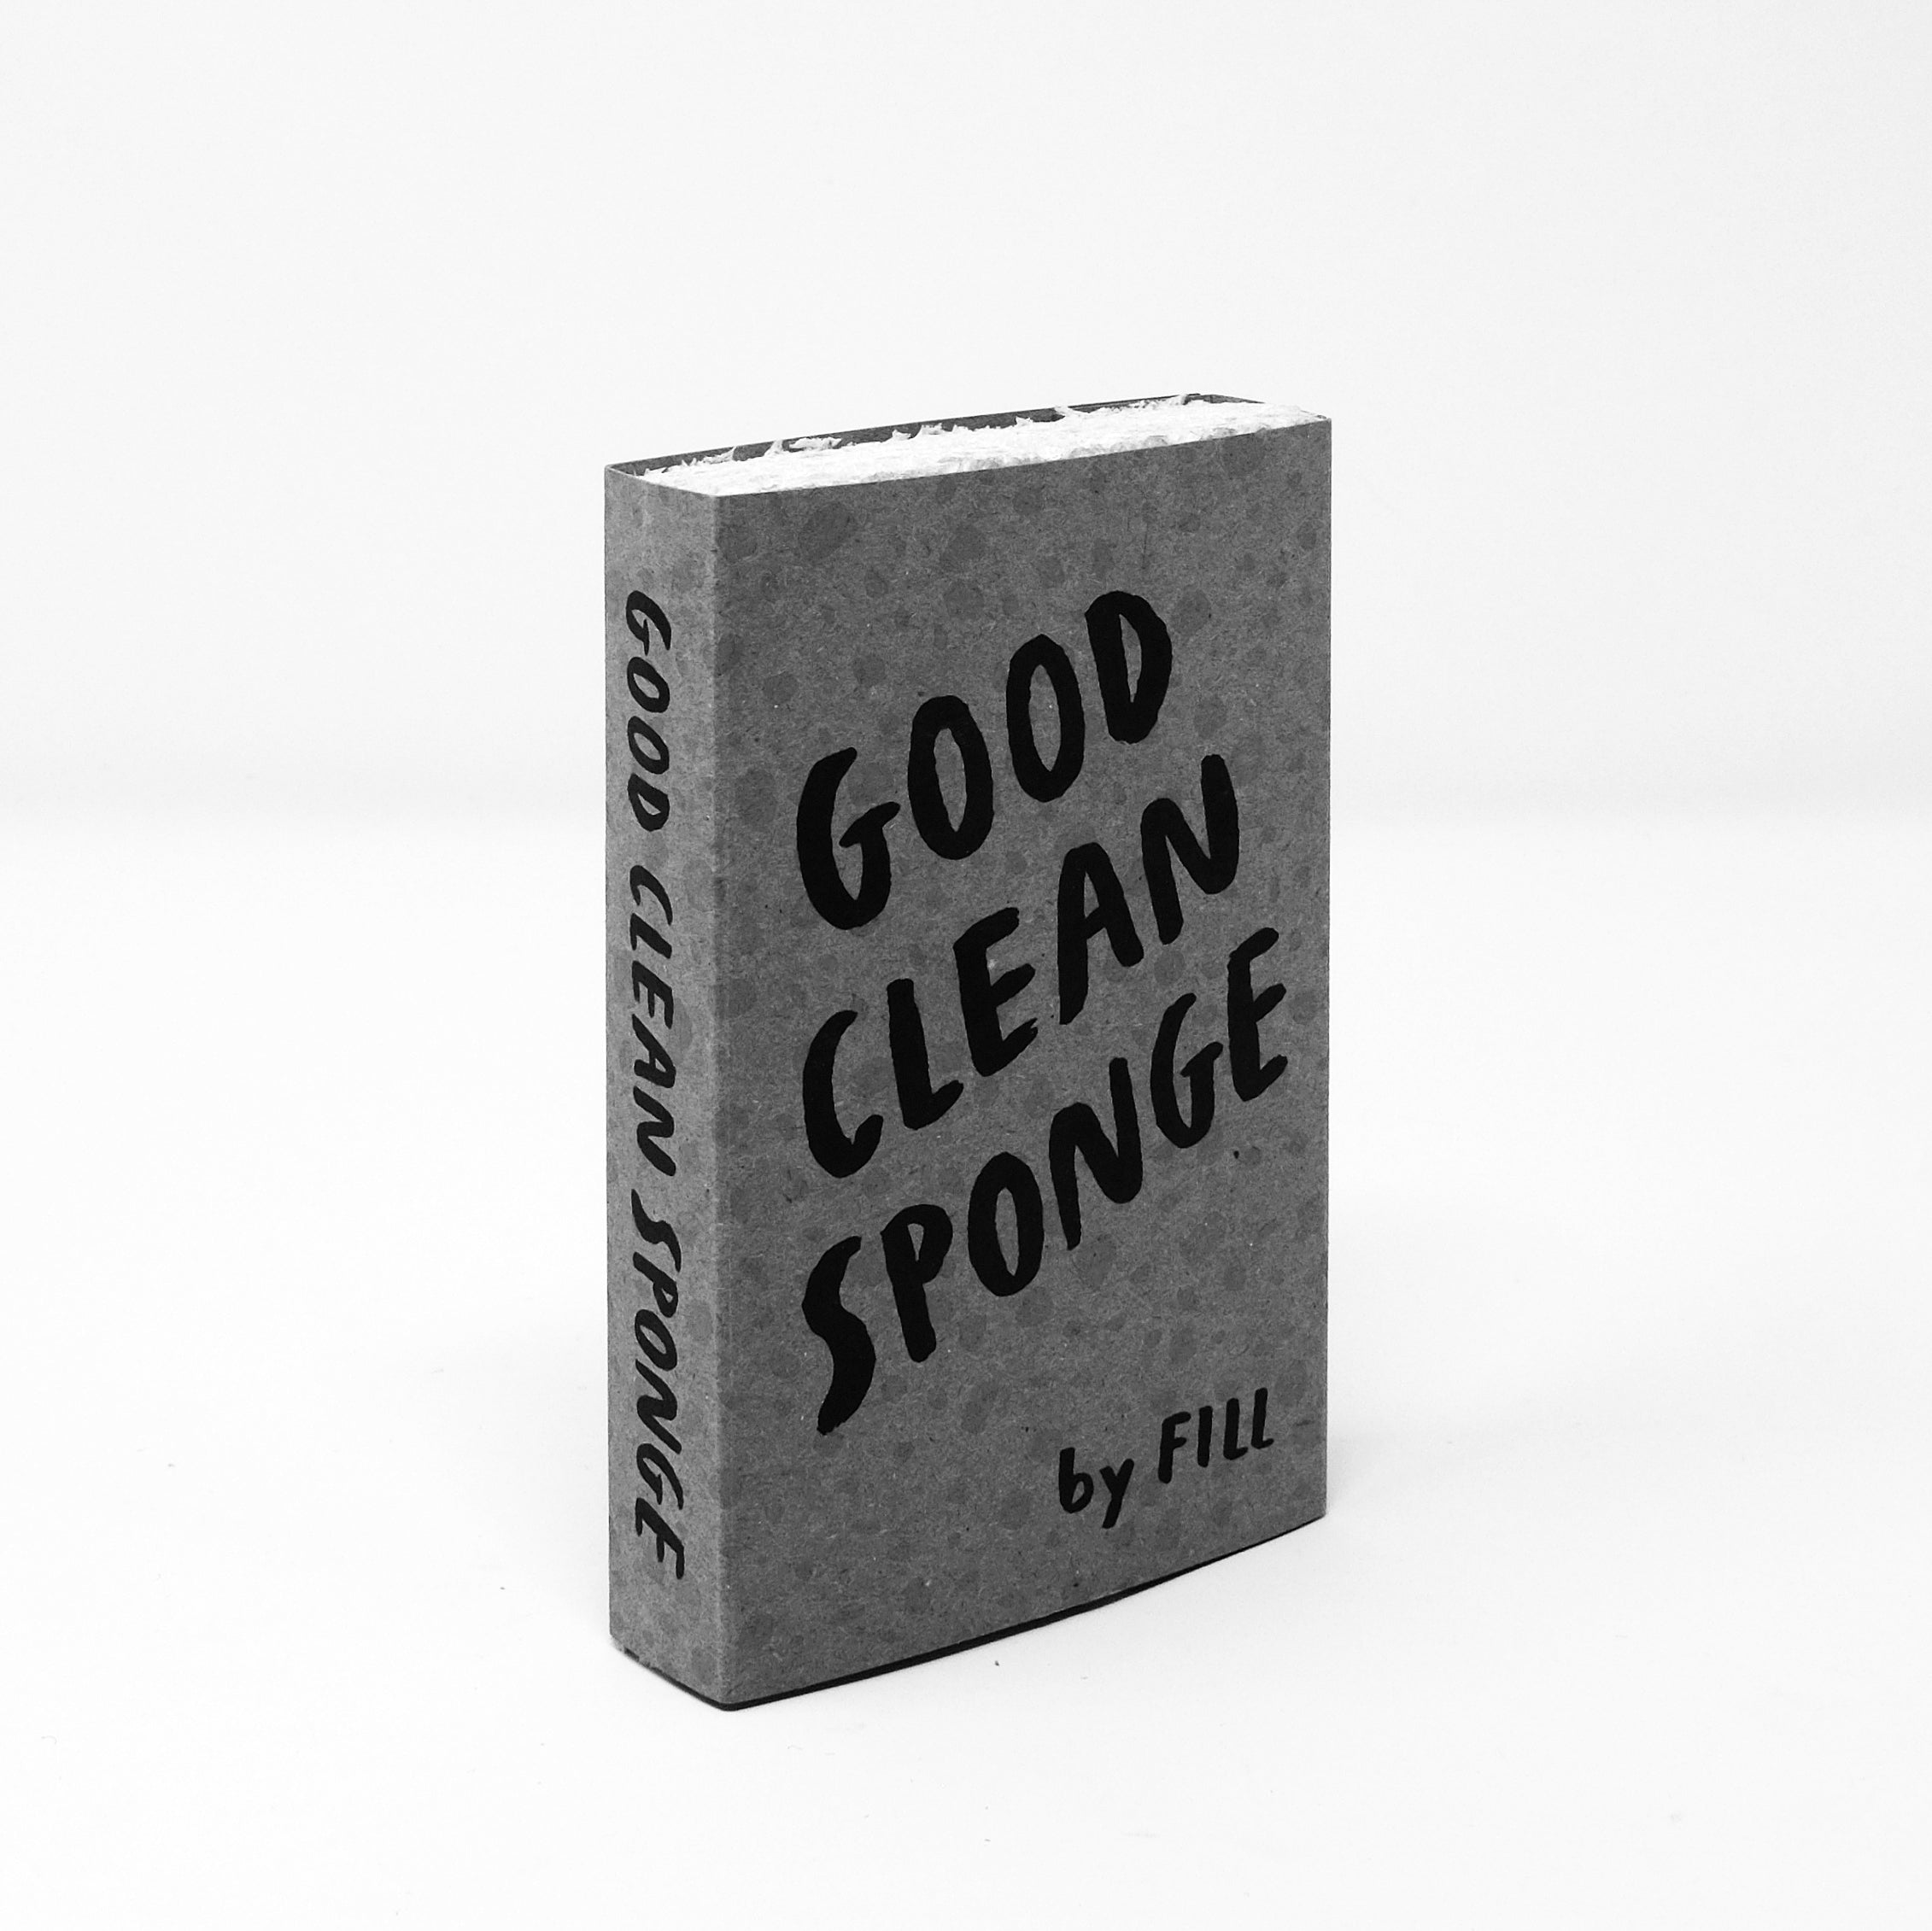 Product picture of FILL GOOD CLEAN SPONGE